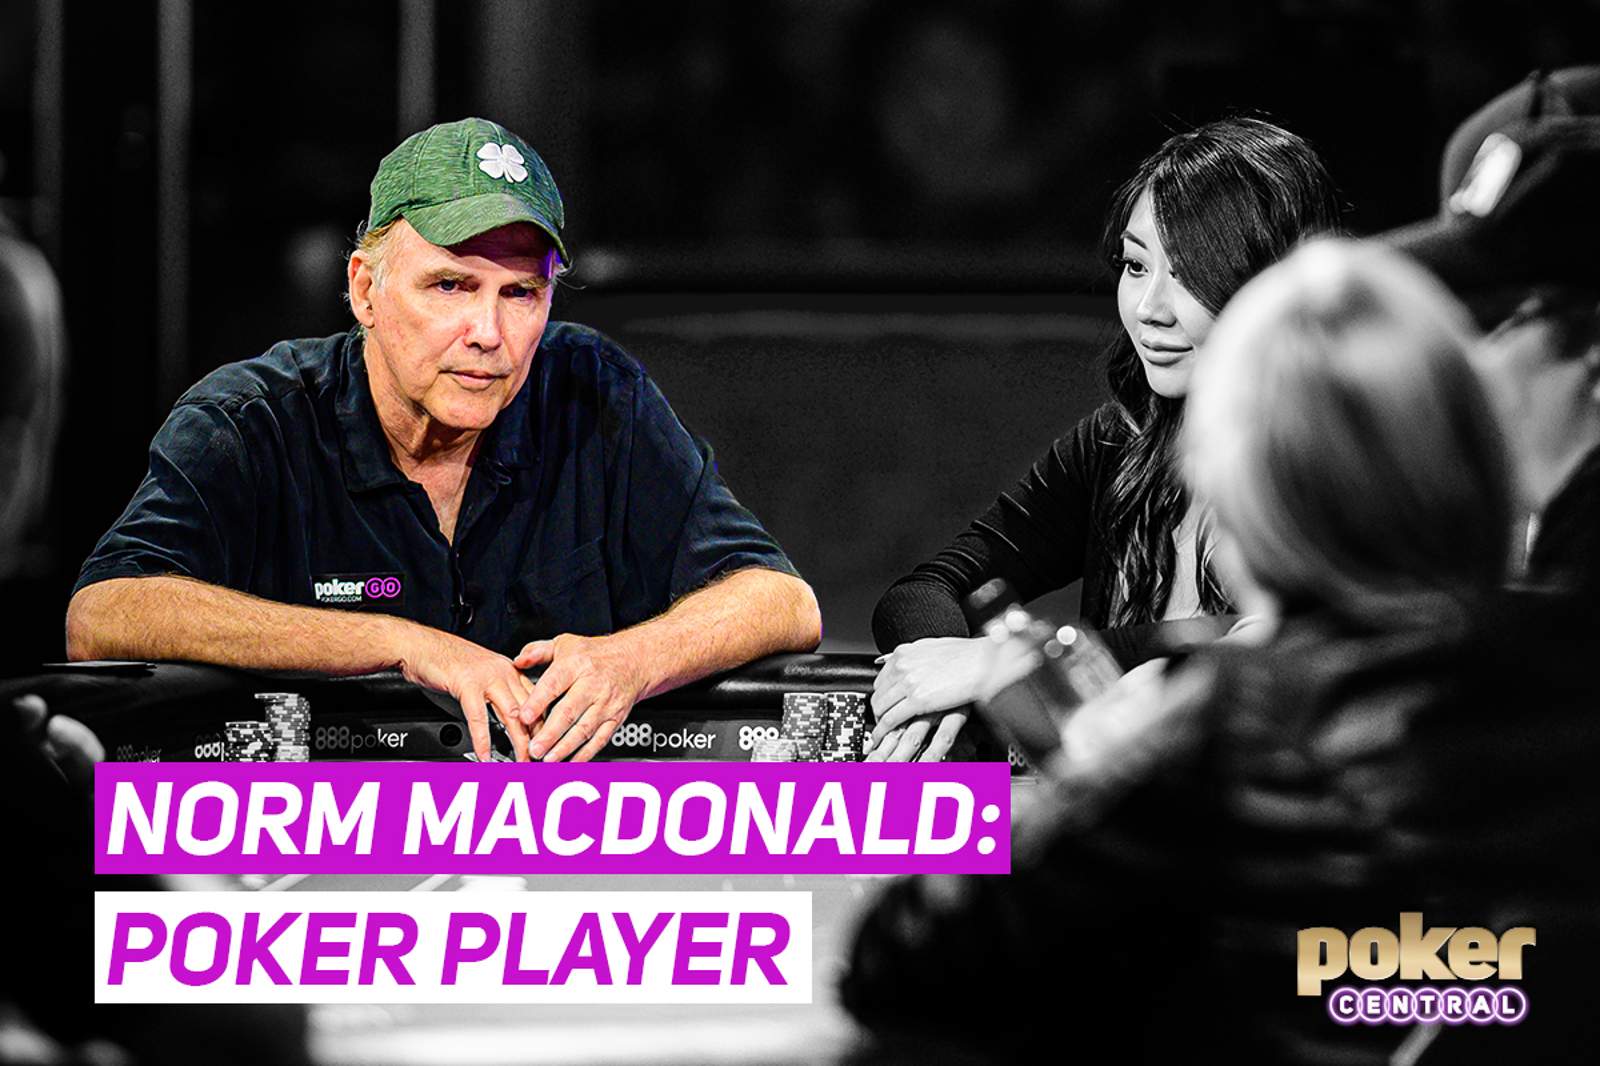 Norm Macdonald the Poker Player